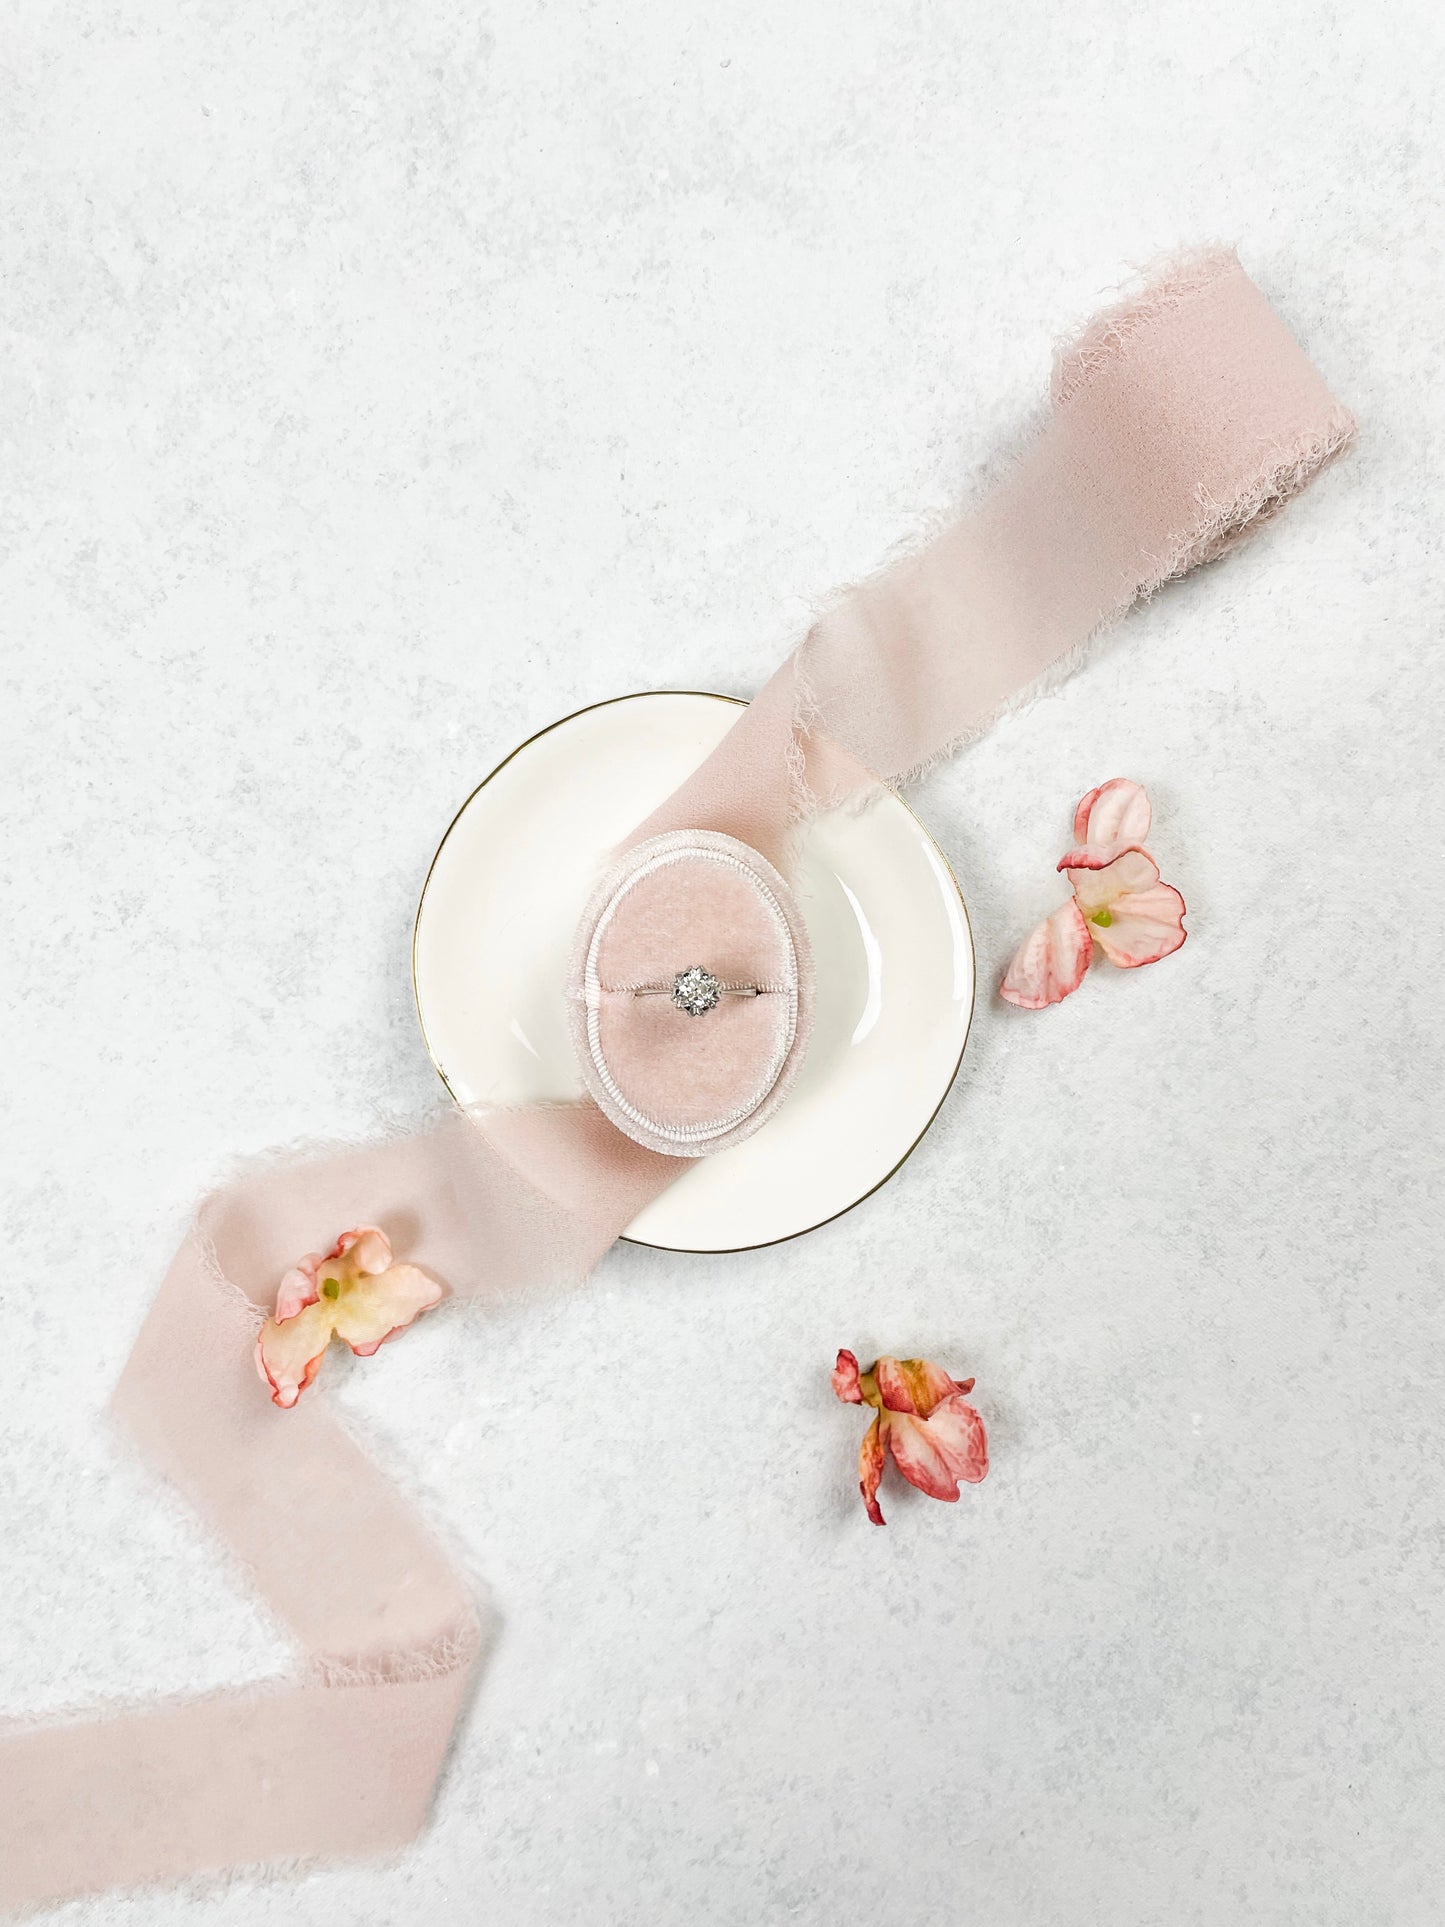 Mini White Ring Dish with Gold Rim | Wedding Flat Lay Props | Flat Lay Styling